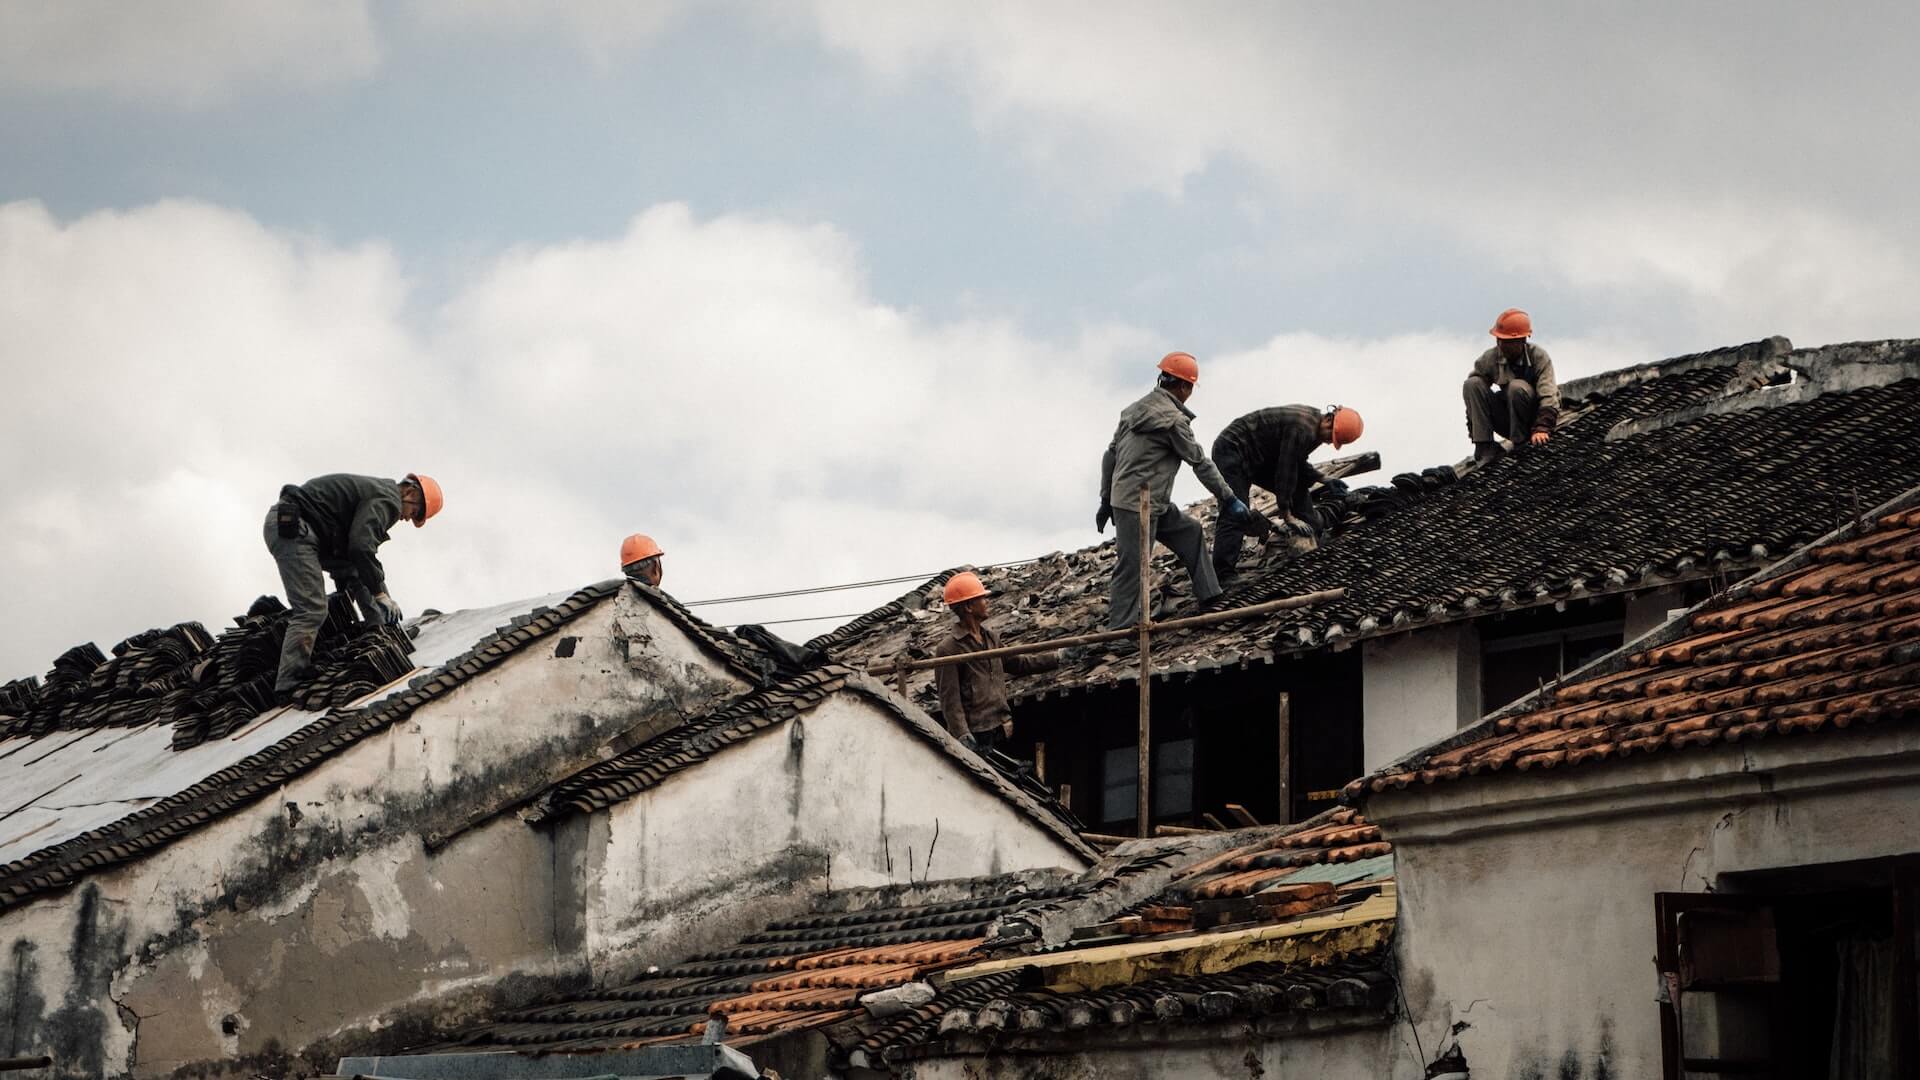 Builders working on a roof